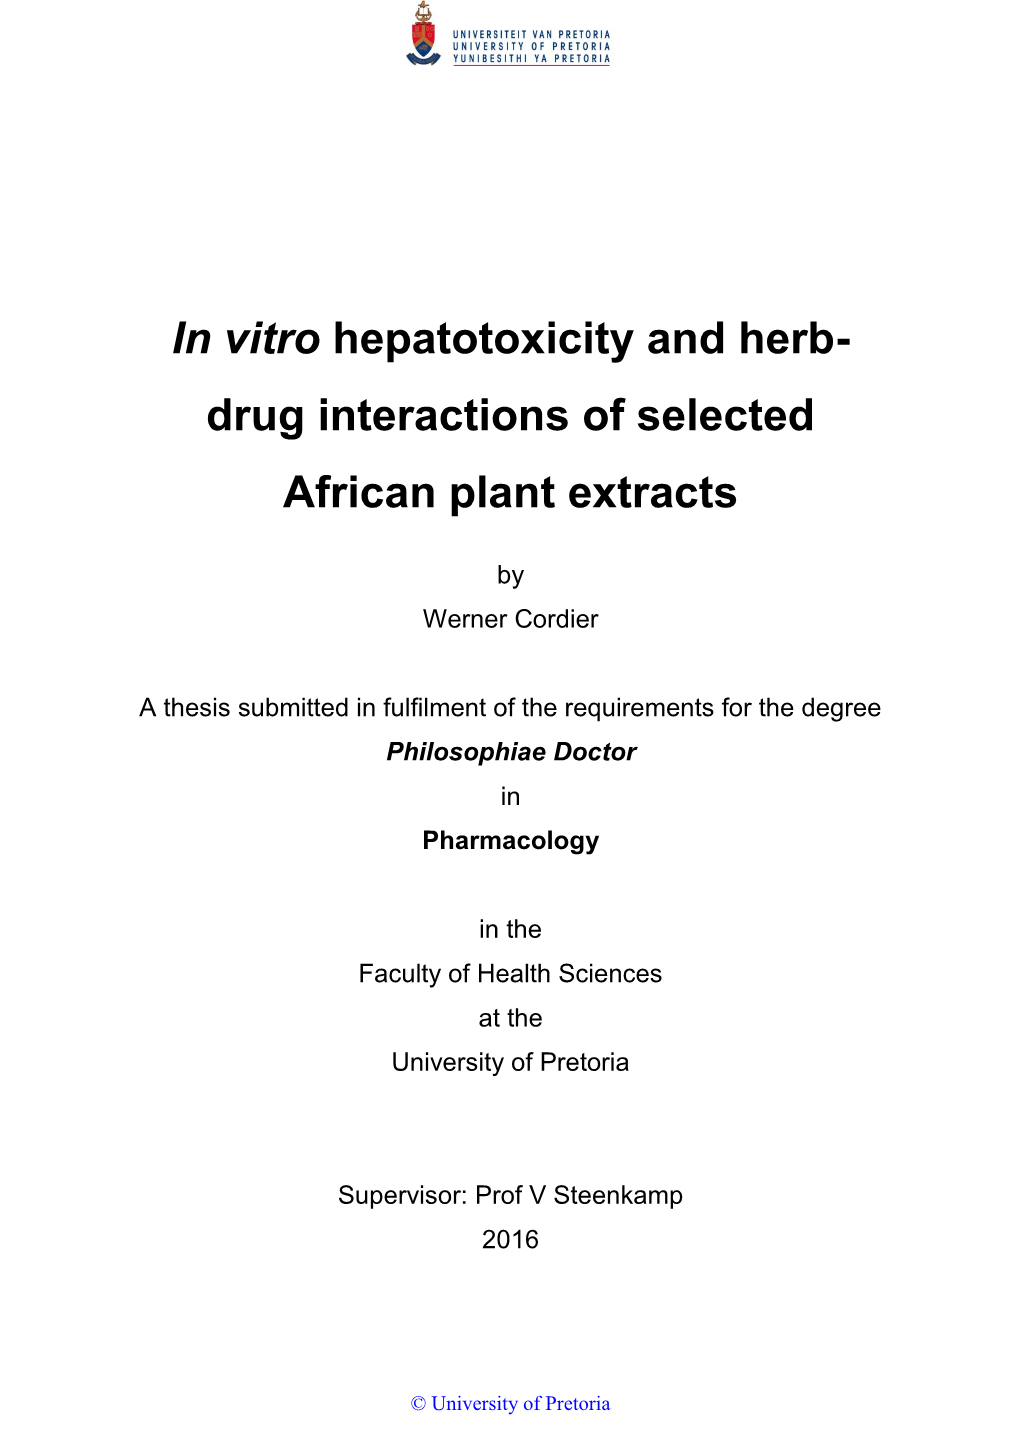 In Vitro Hepatotoxicity and Herb- Drug Interactions of Selected African